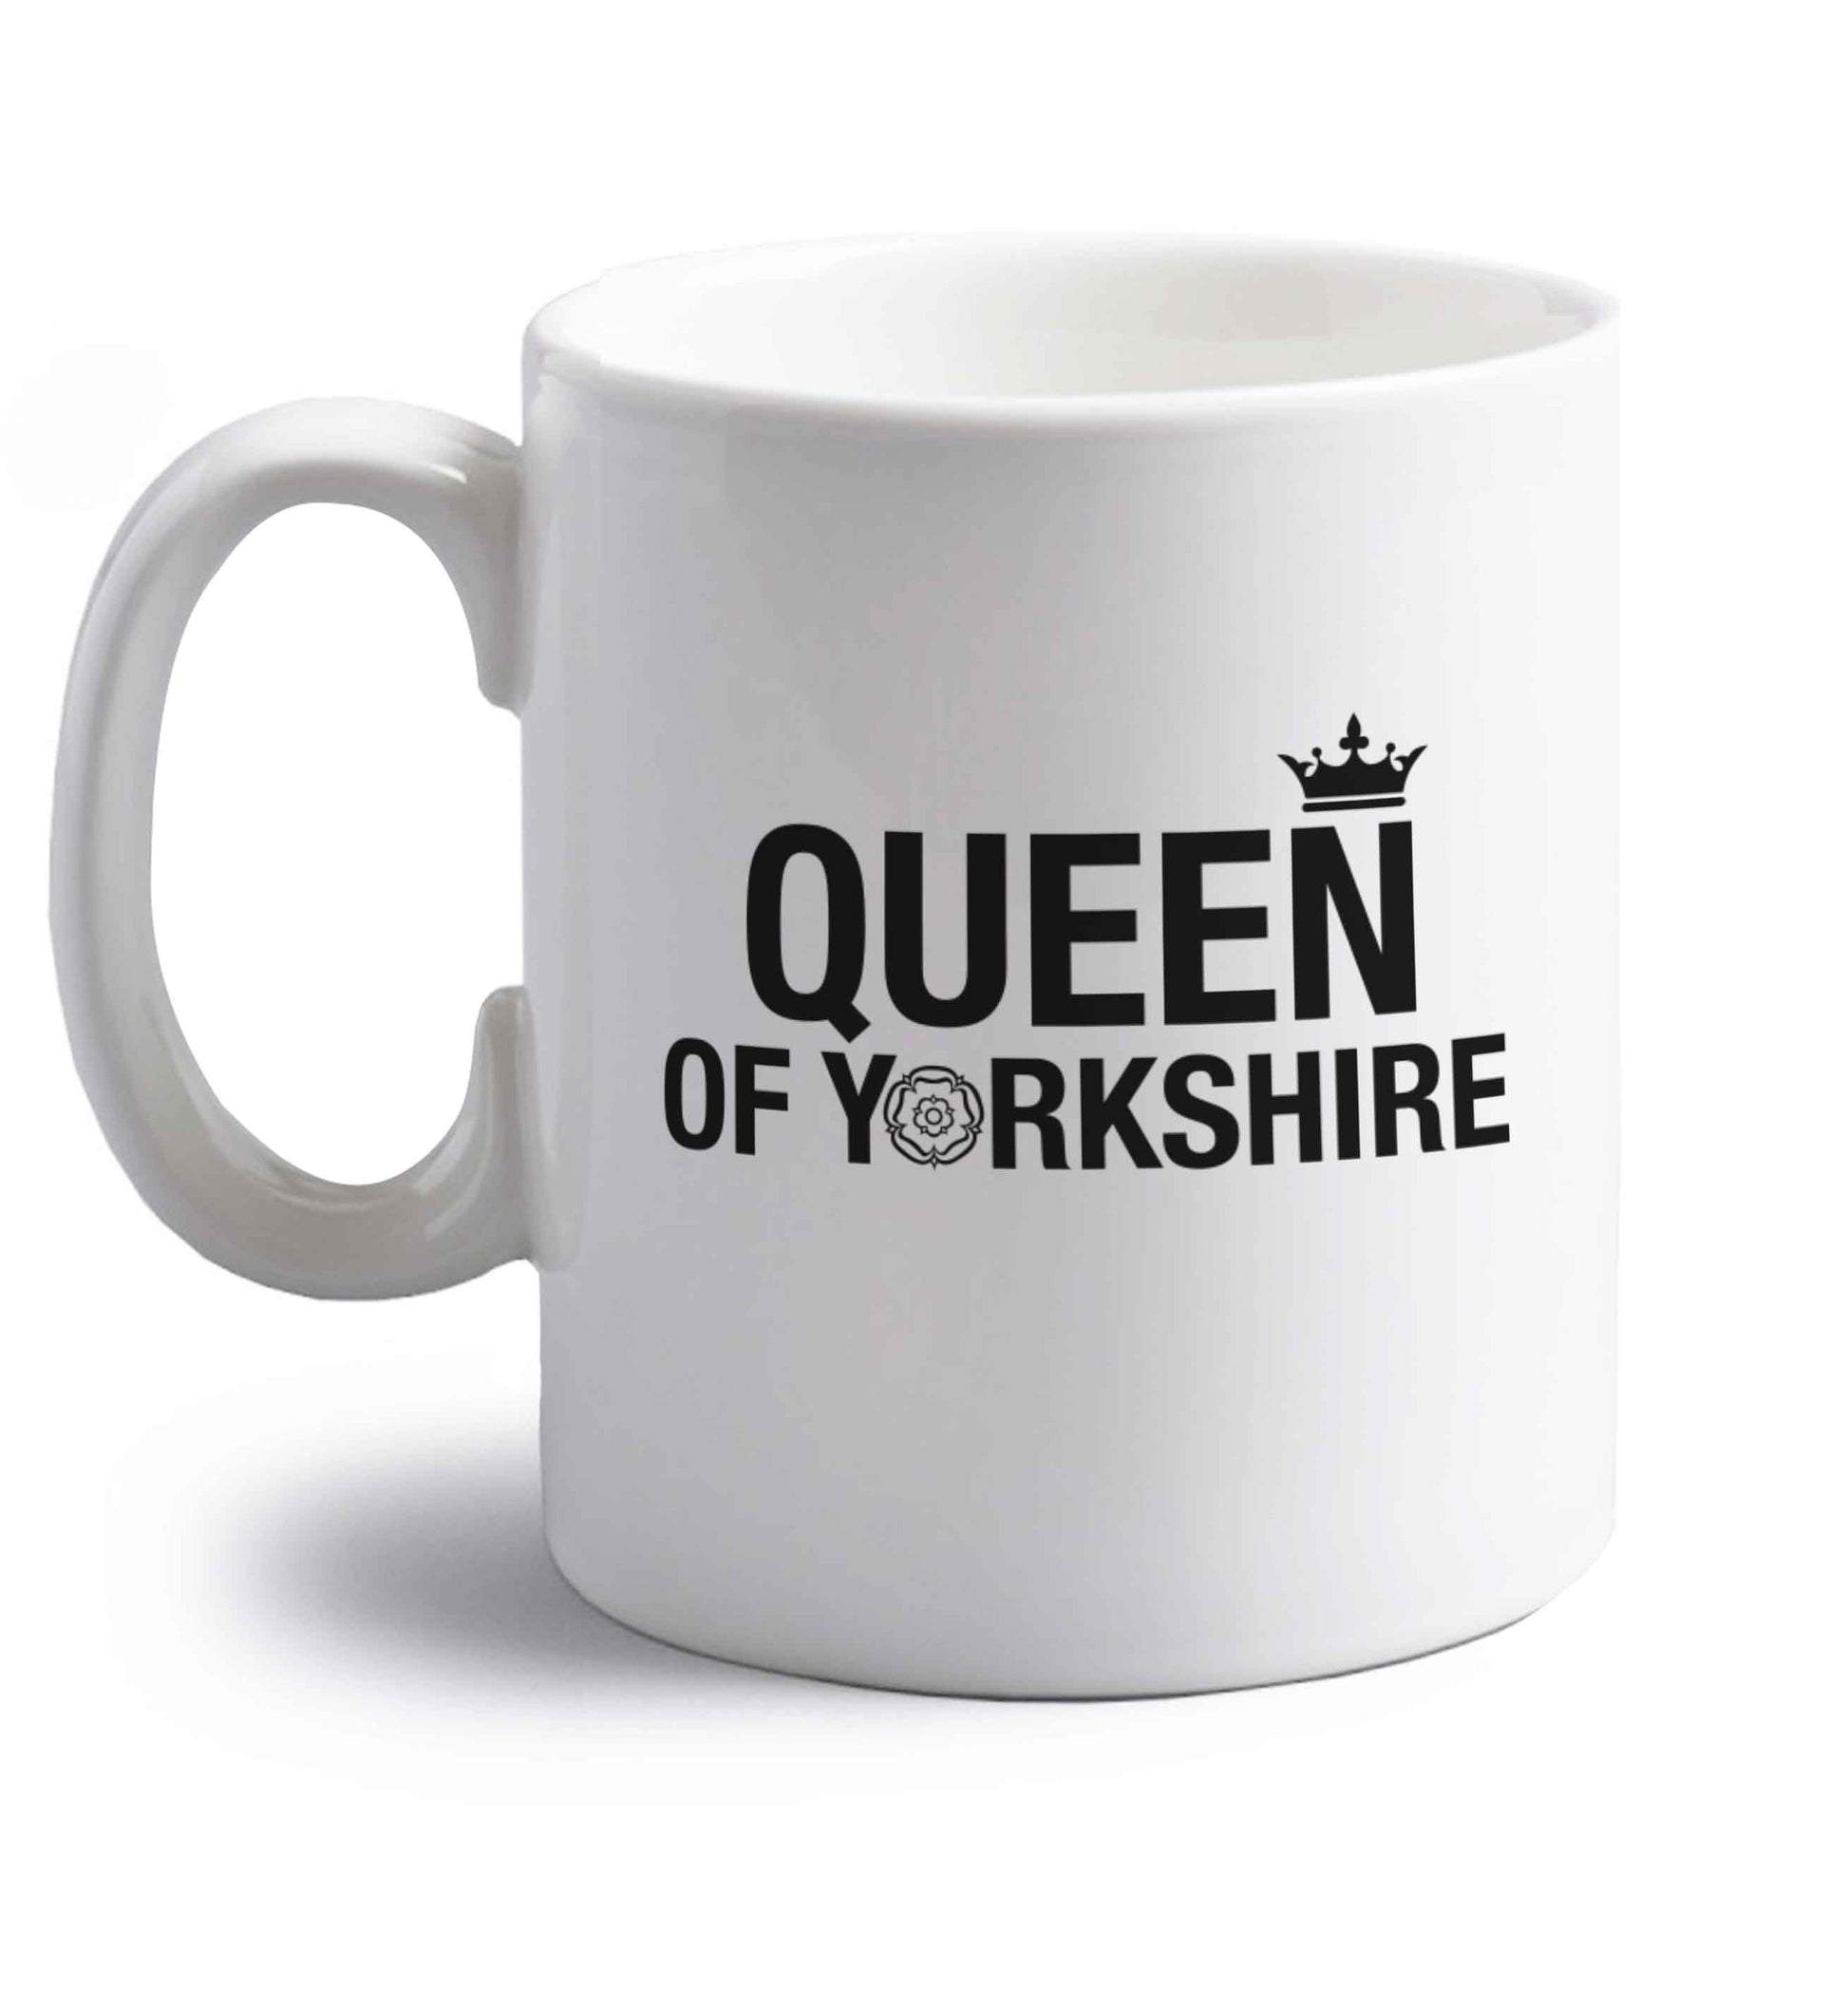 Queen of Yorkshire right handed white ceramic mug 